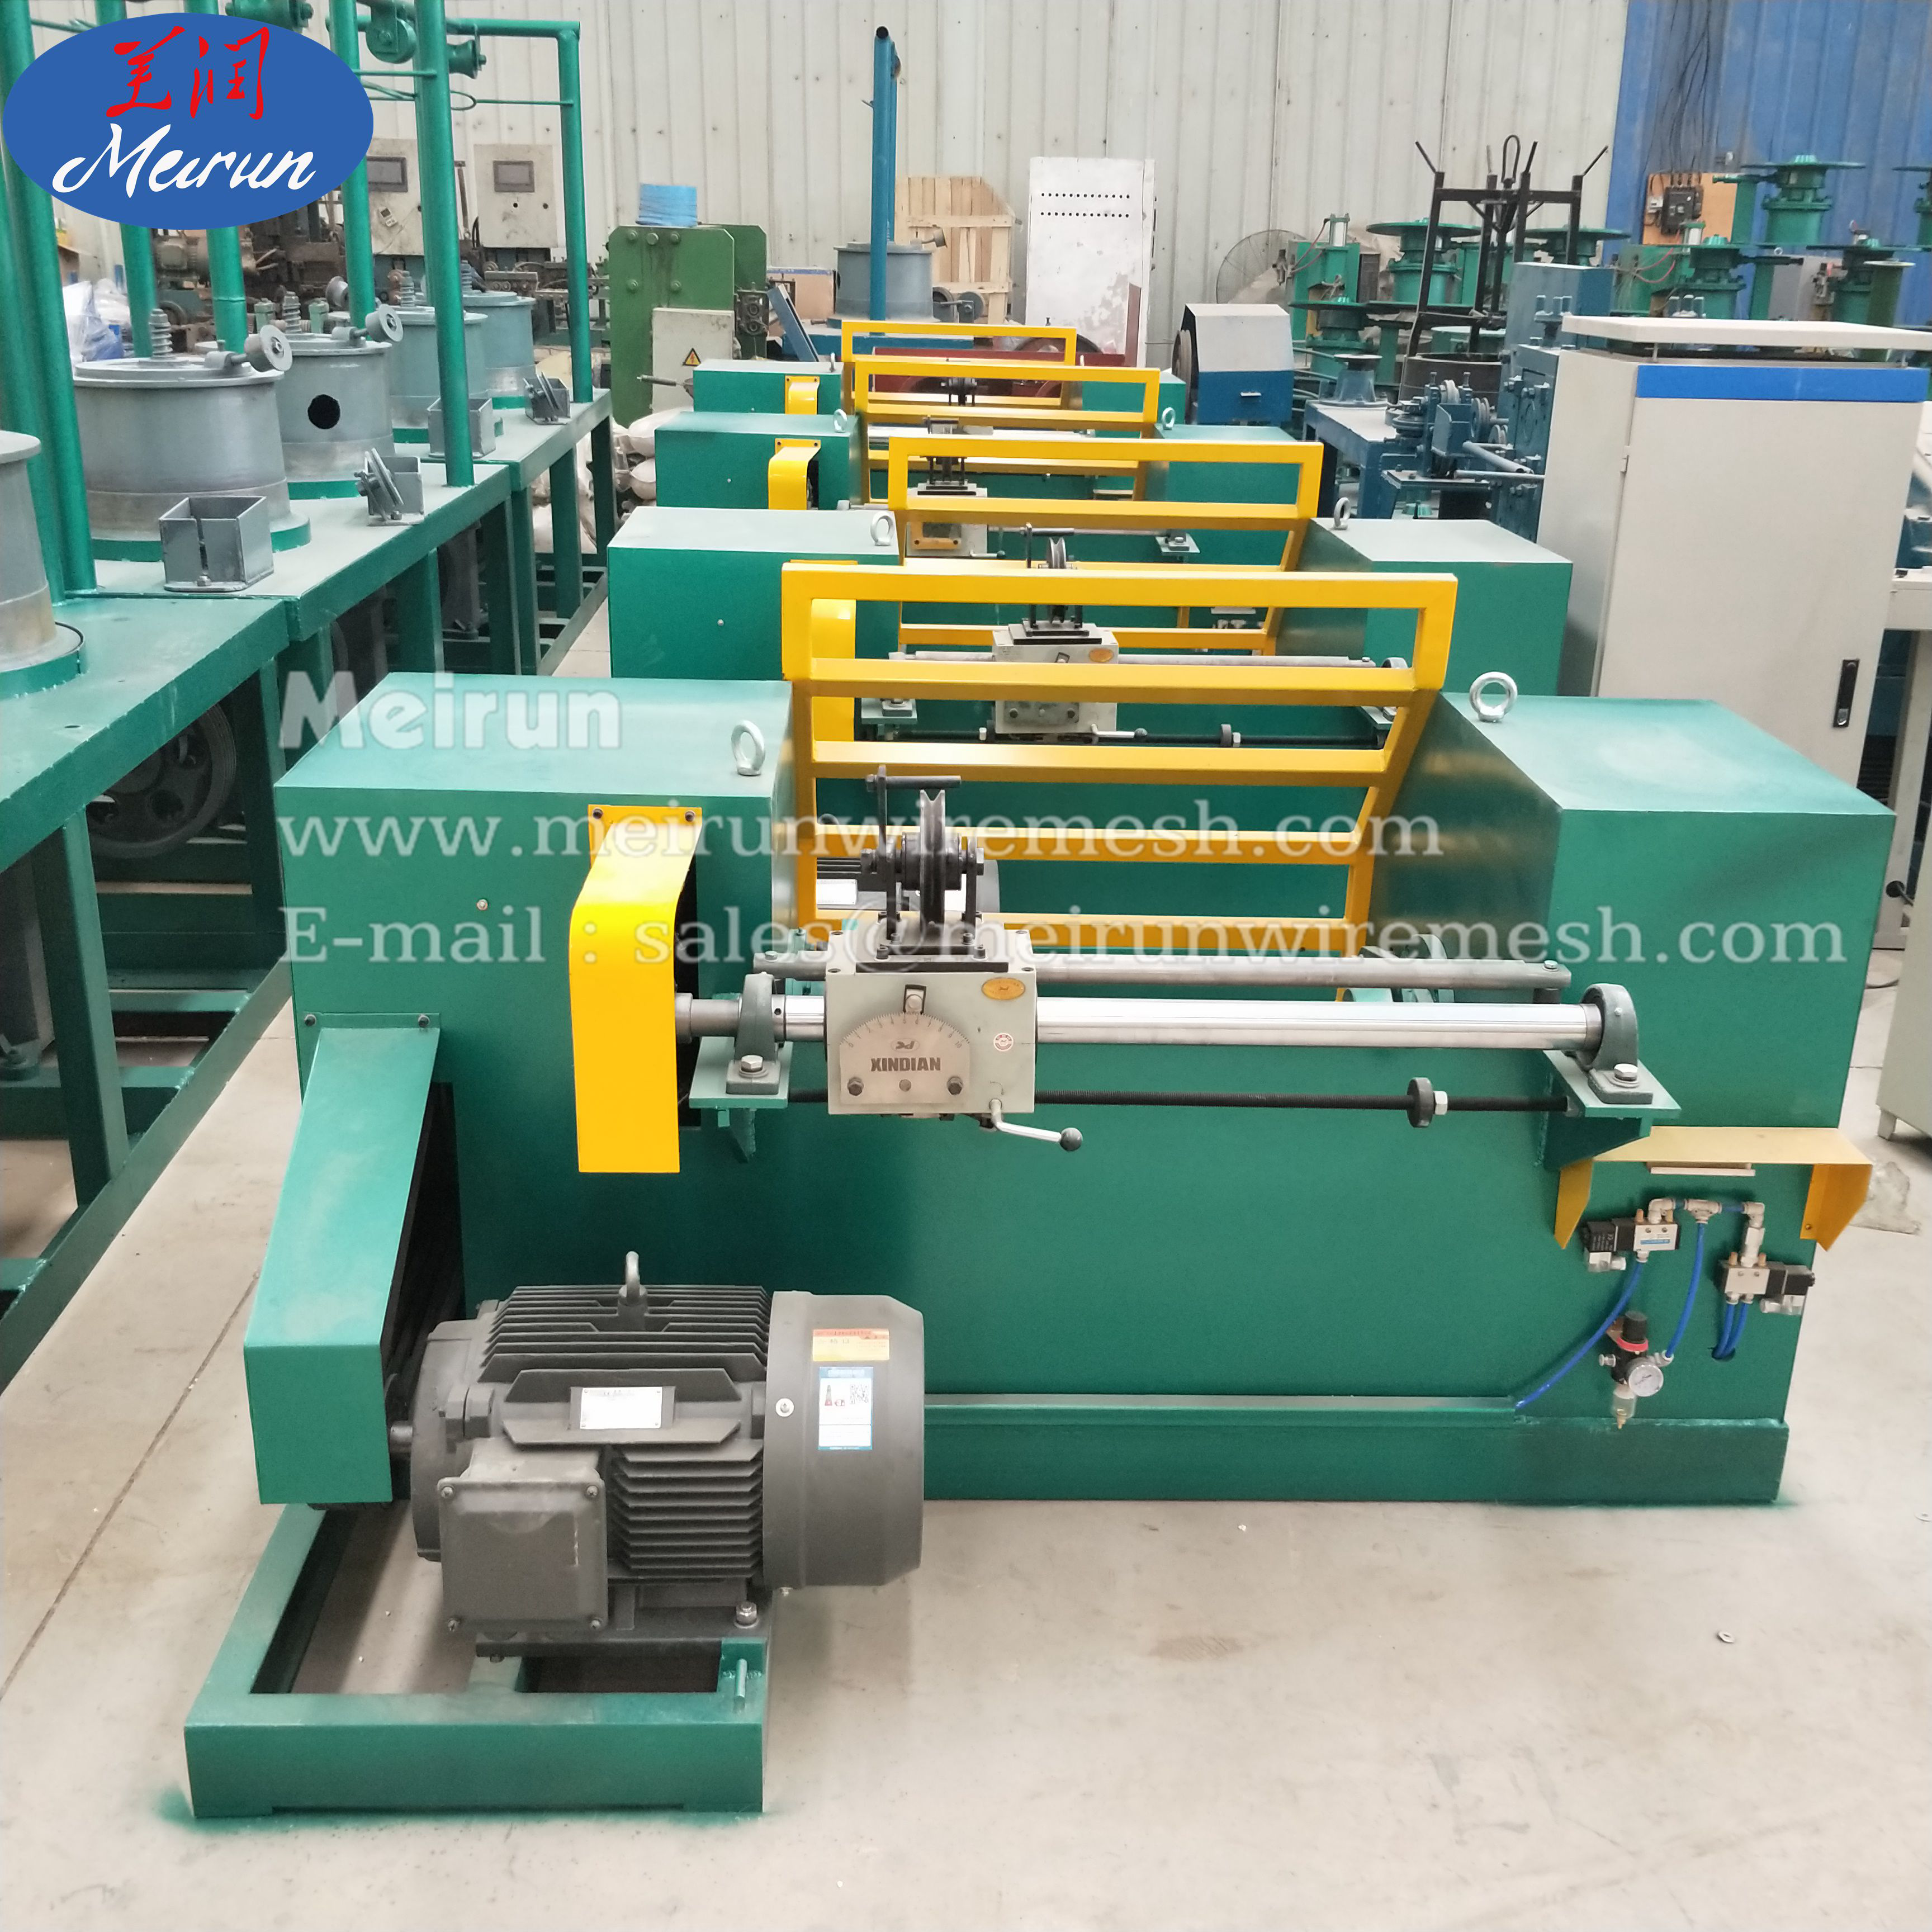 Continous Wire Drawing Machine Used for Drawing Wire 